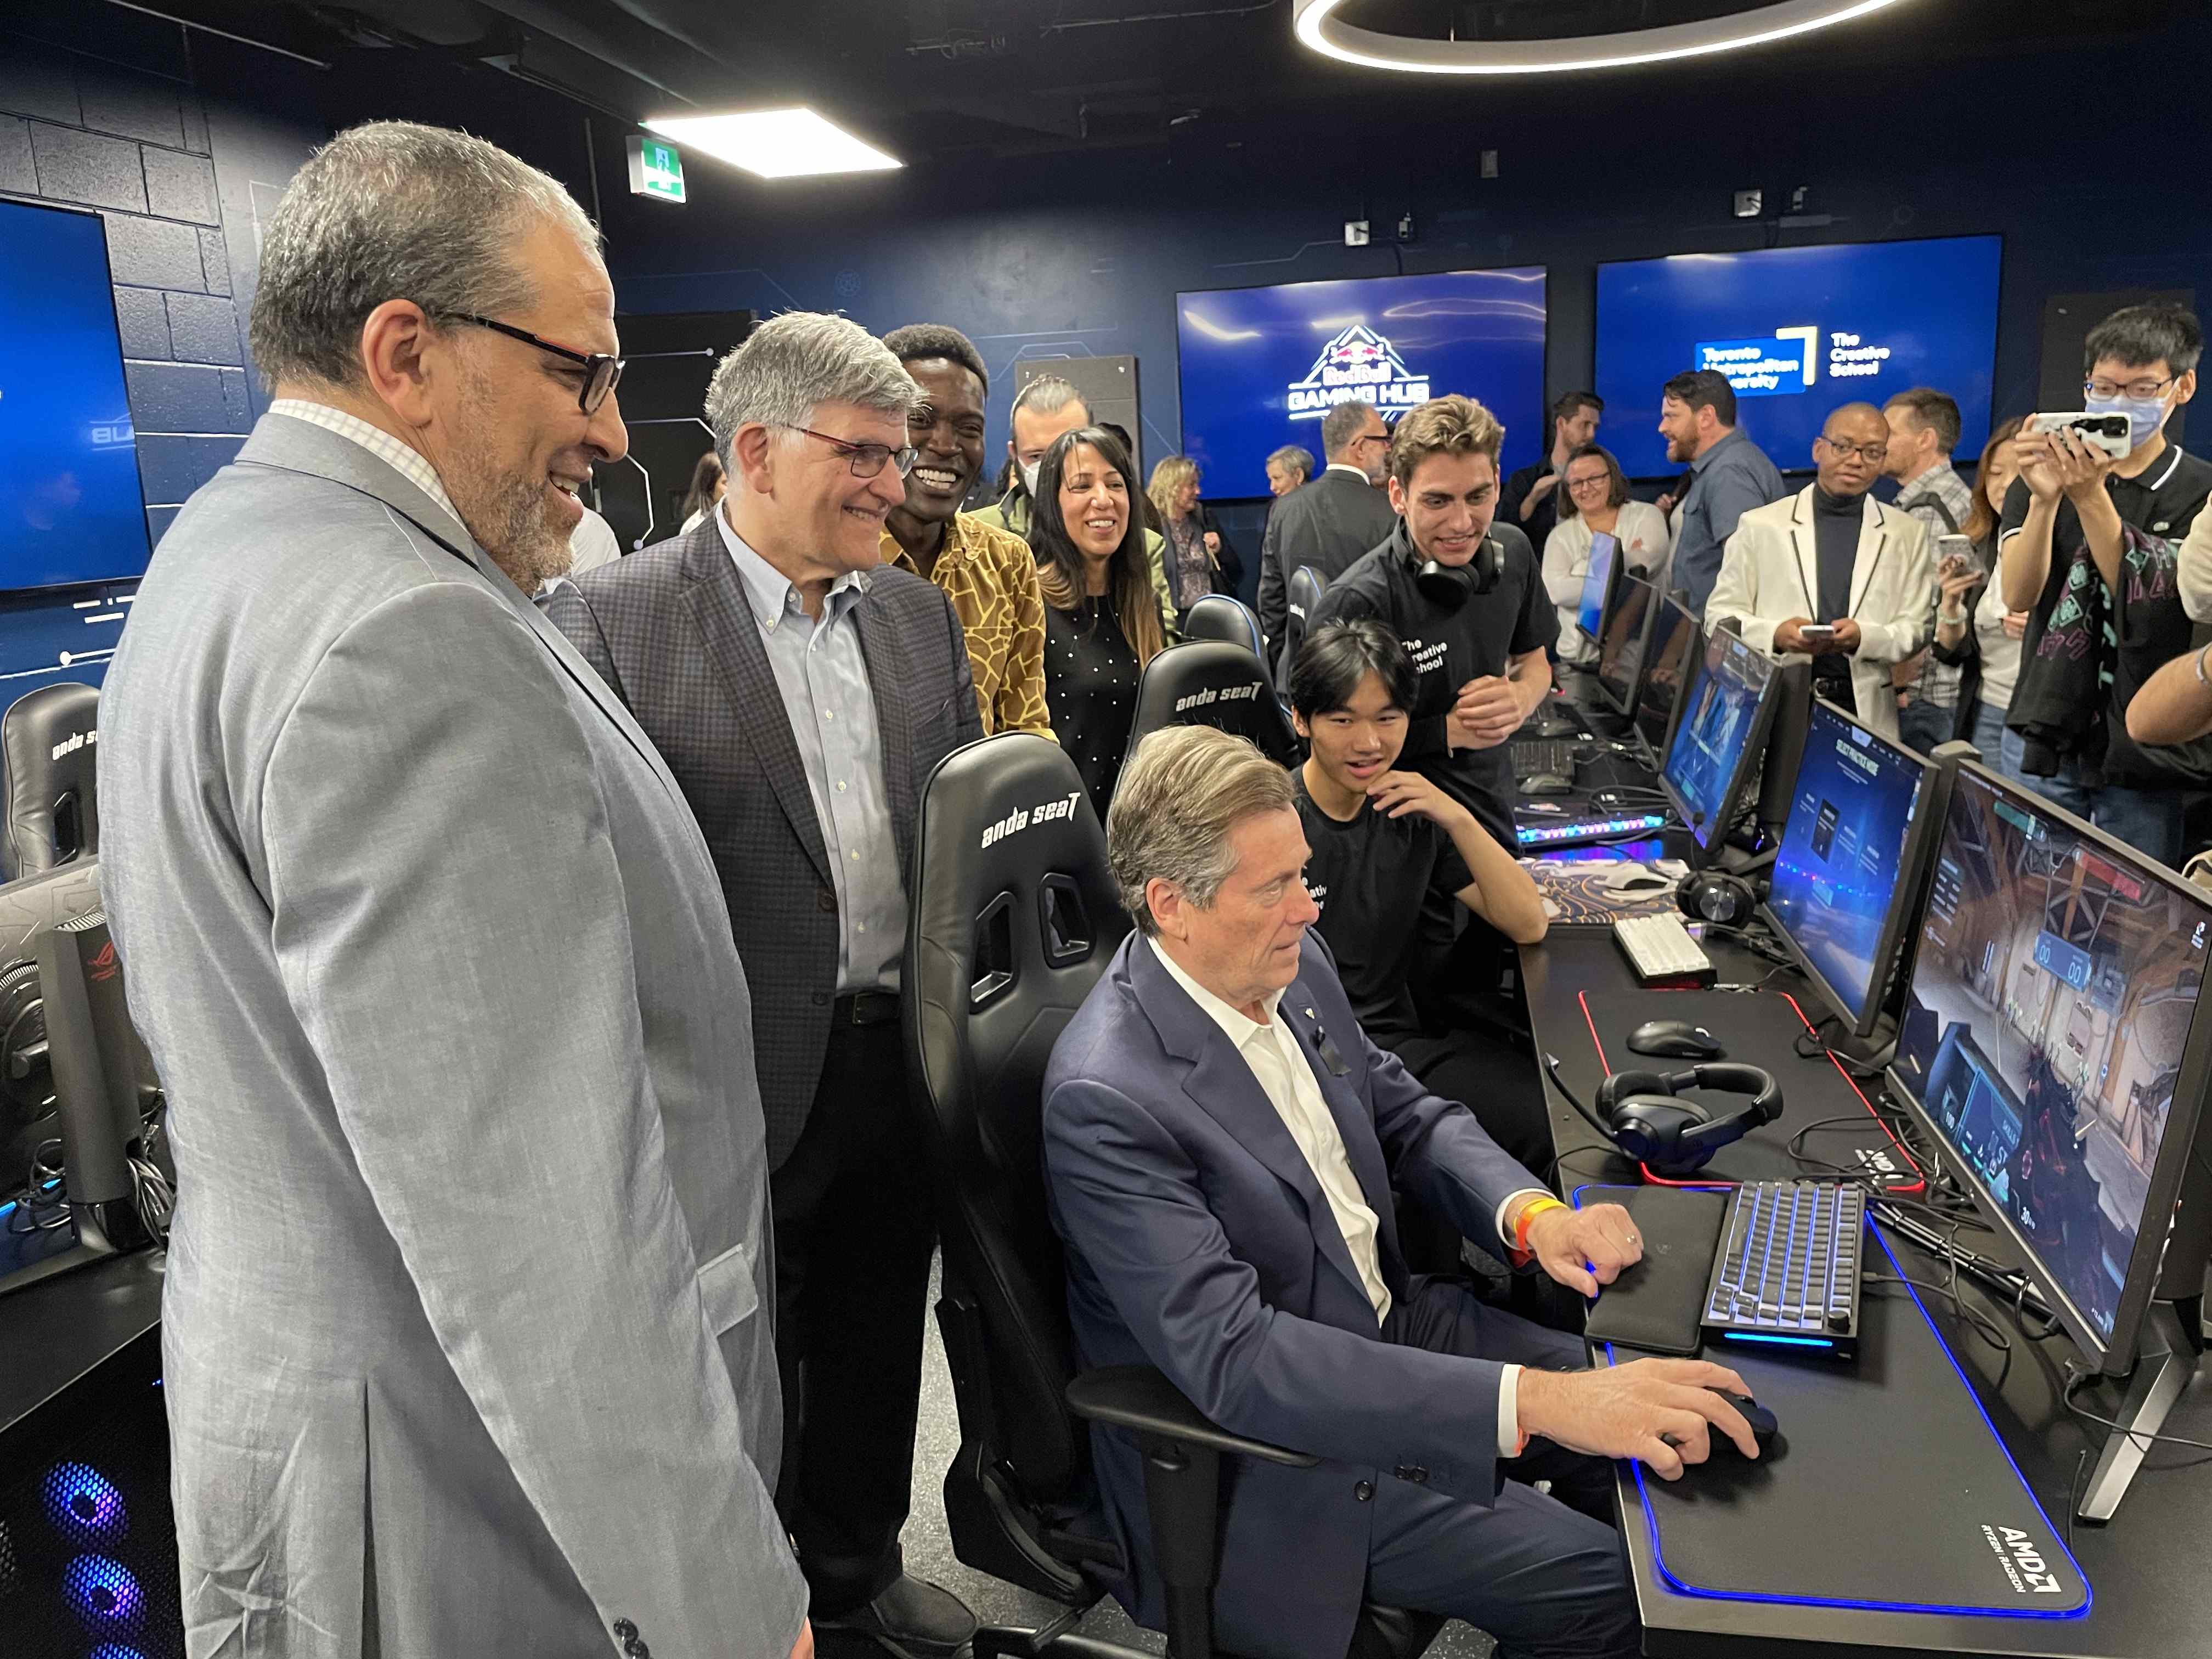 Mayor John Tory sits infront of a computer in the Red Bull Gaming Hub while President Lachemi and Dean Charles Fazon stand behind him